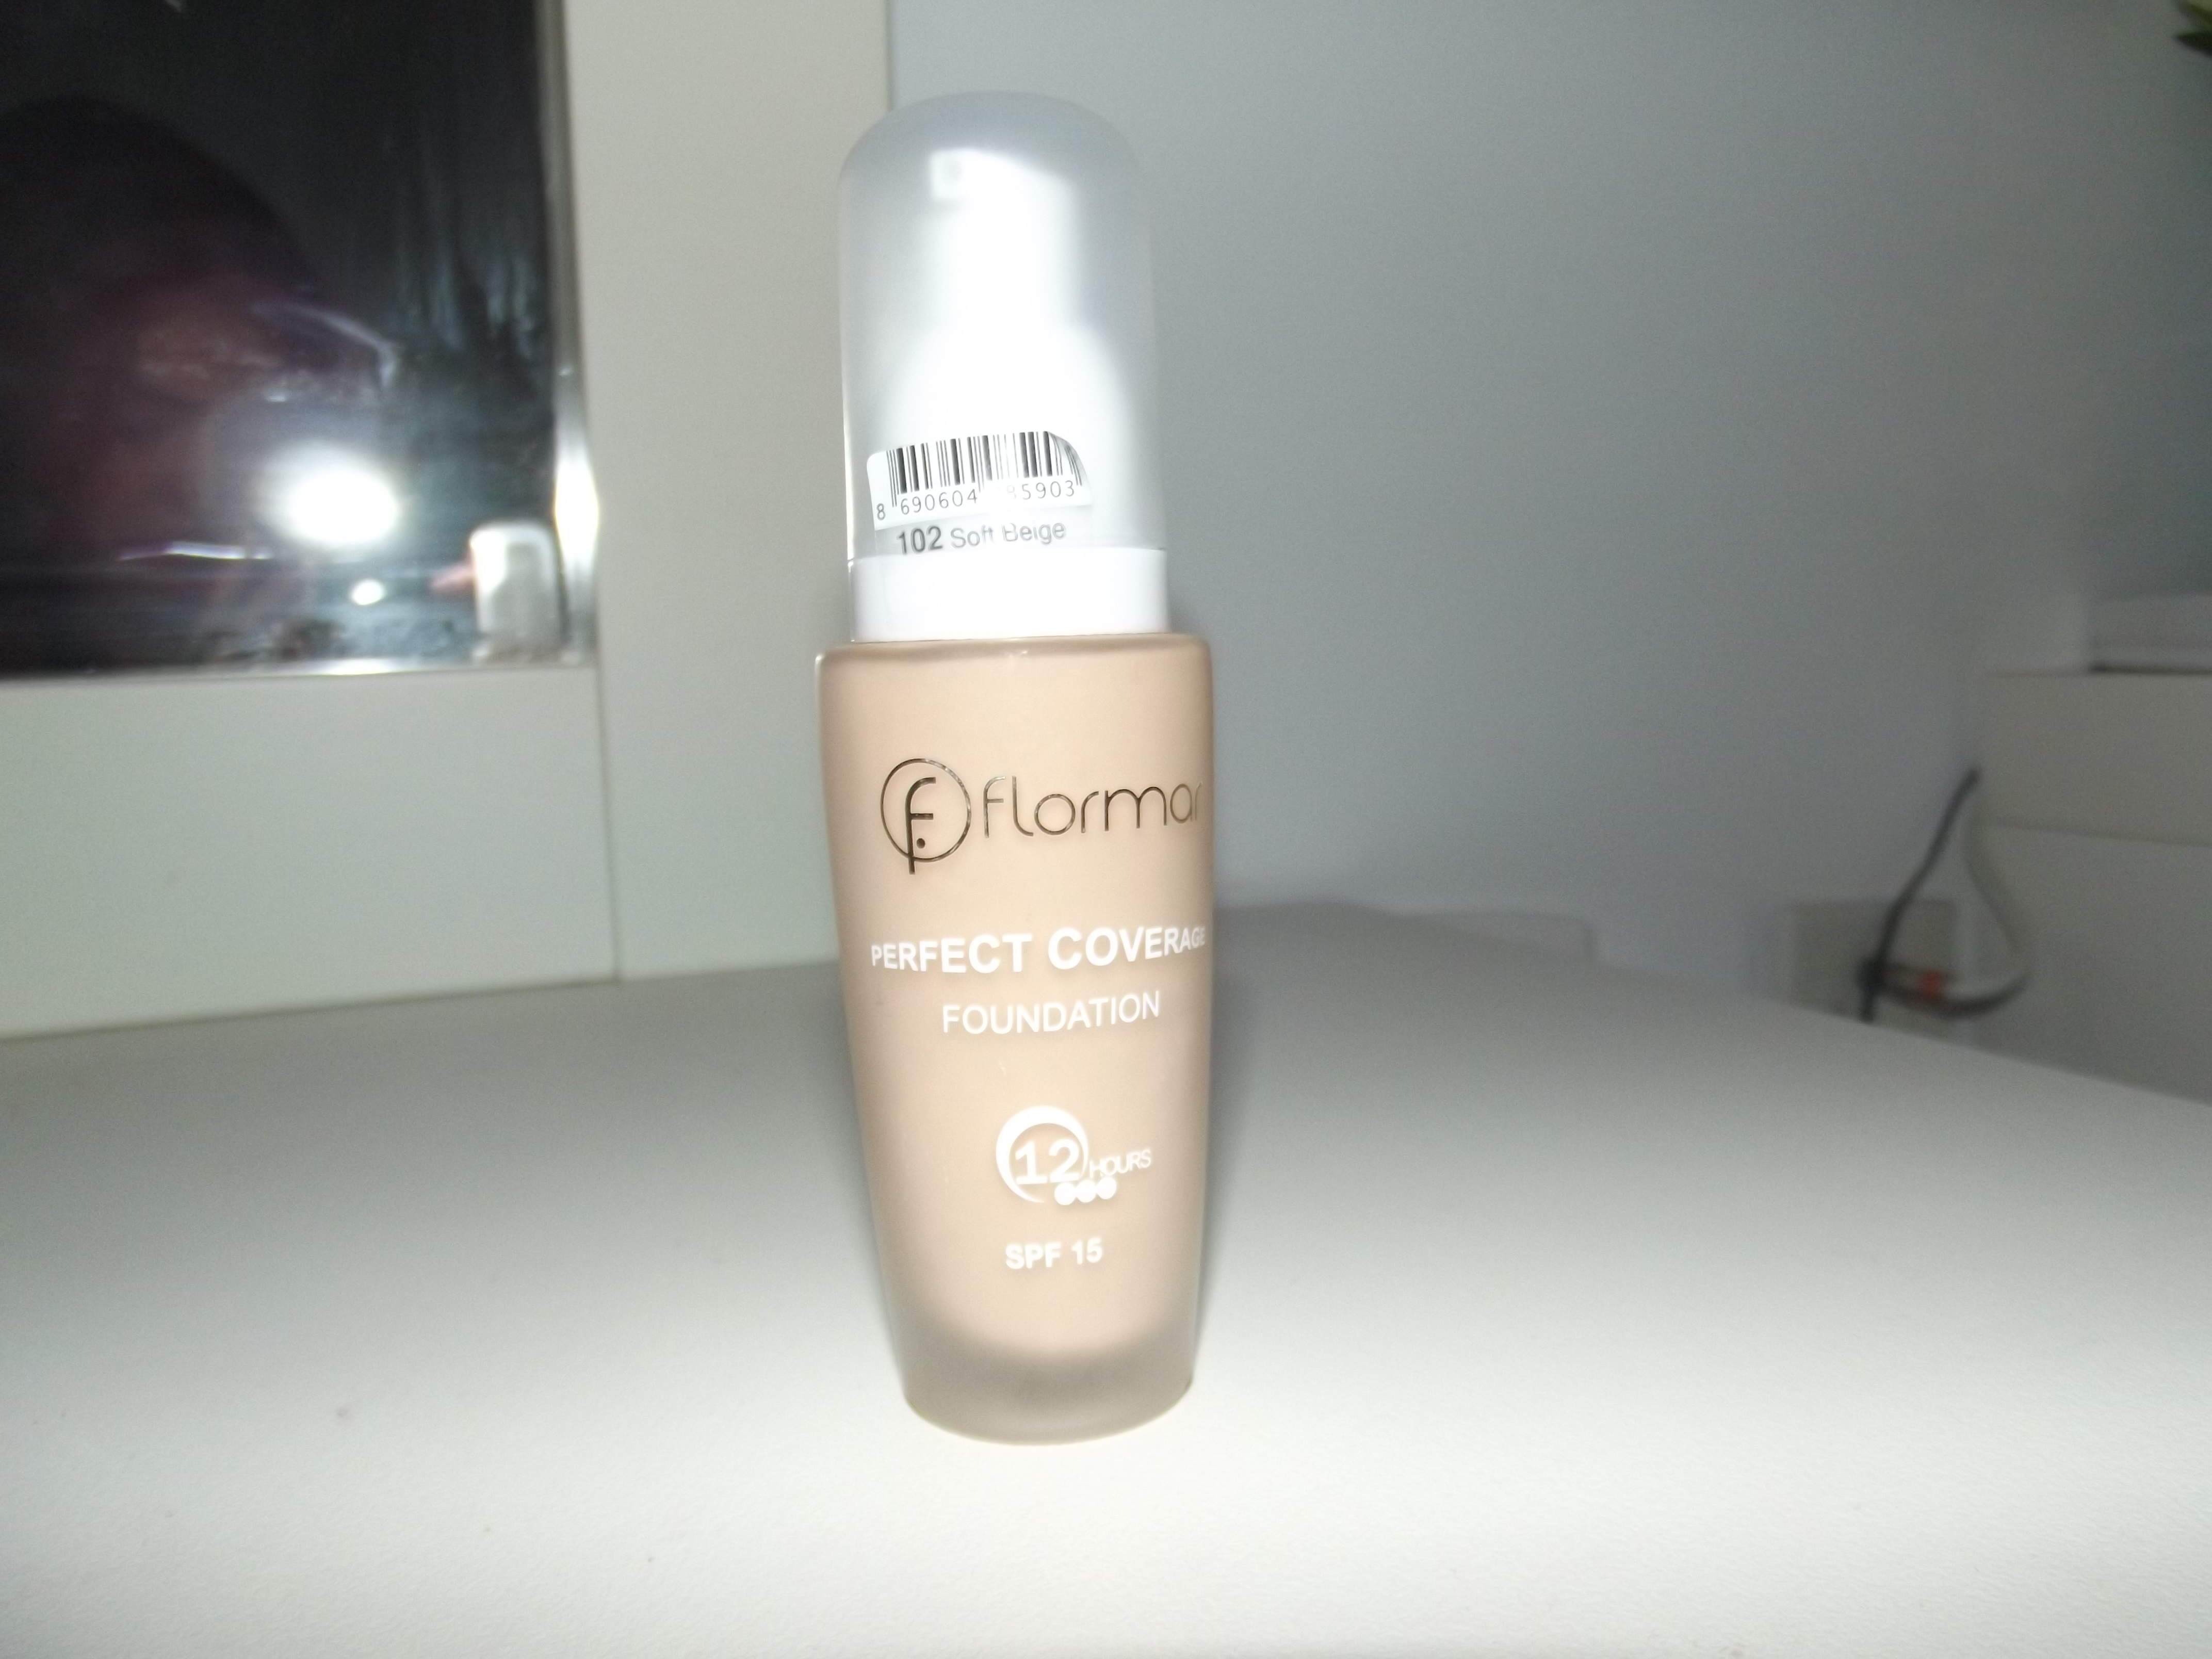 Flormar “12 HR Perfect Coverage” Foundation Review,Demo & Dupes!